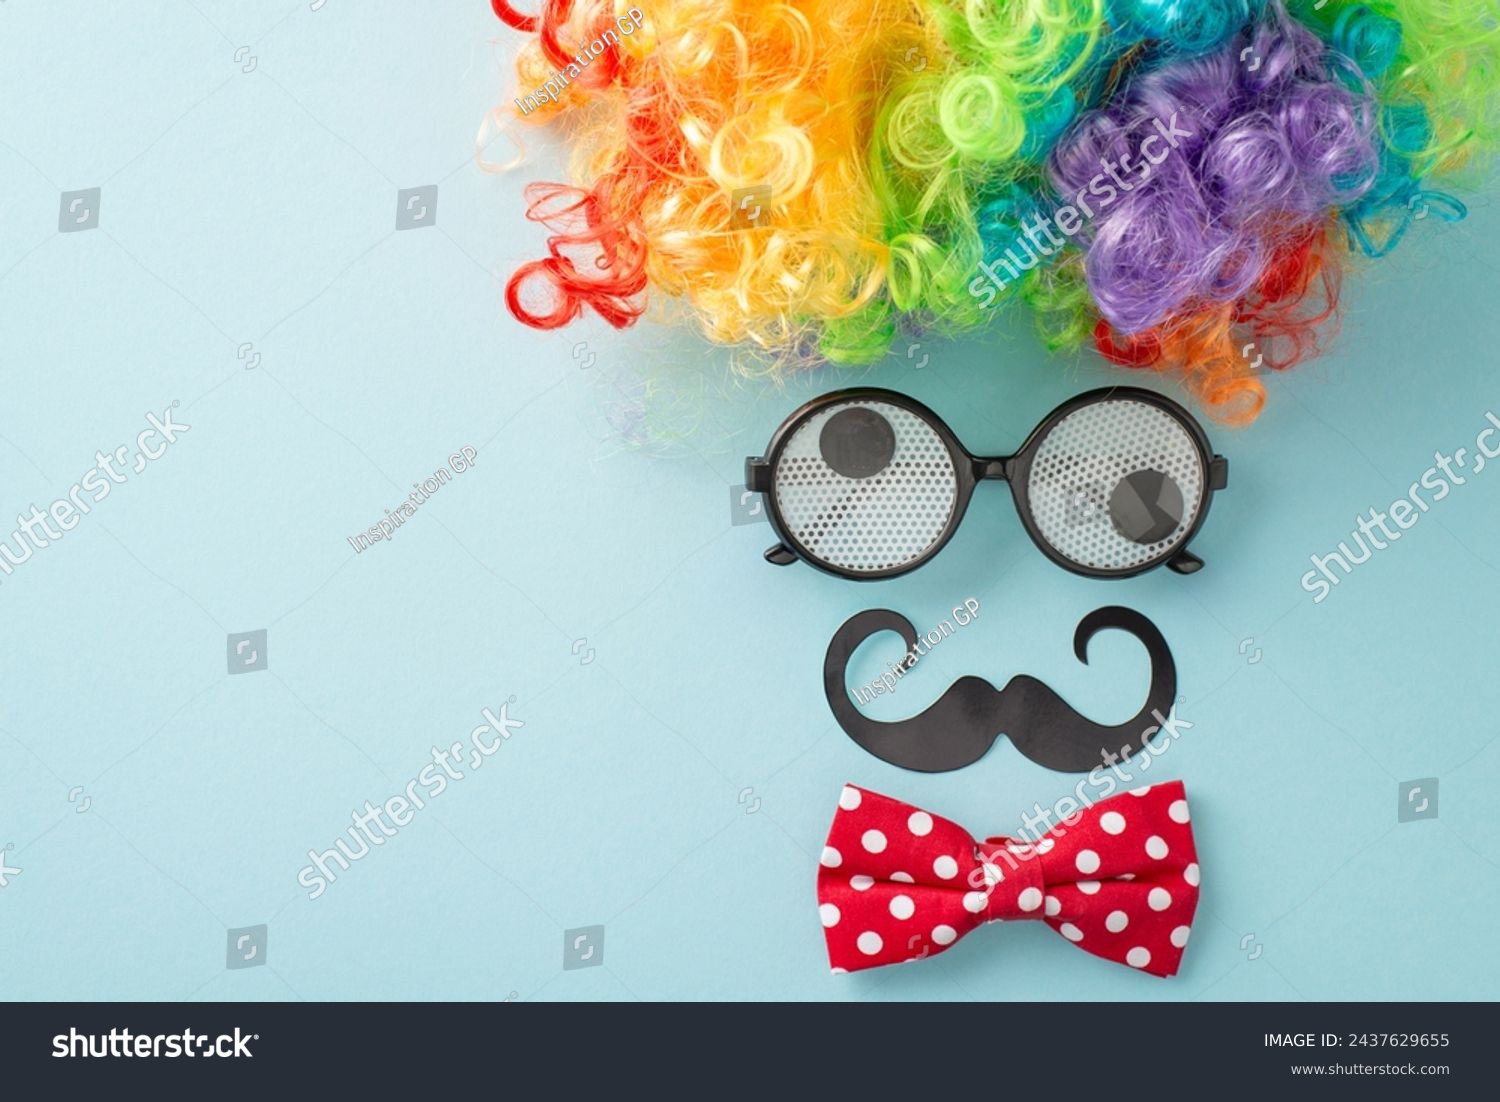 April Foolery display: top view photo with humorous goggles, buffoon's wig, neckwear, and pretend mustache, assembled to imitate a person's facial features on a pastel blue canvas, space for messaging #2437629655